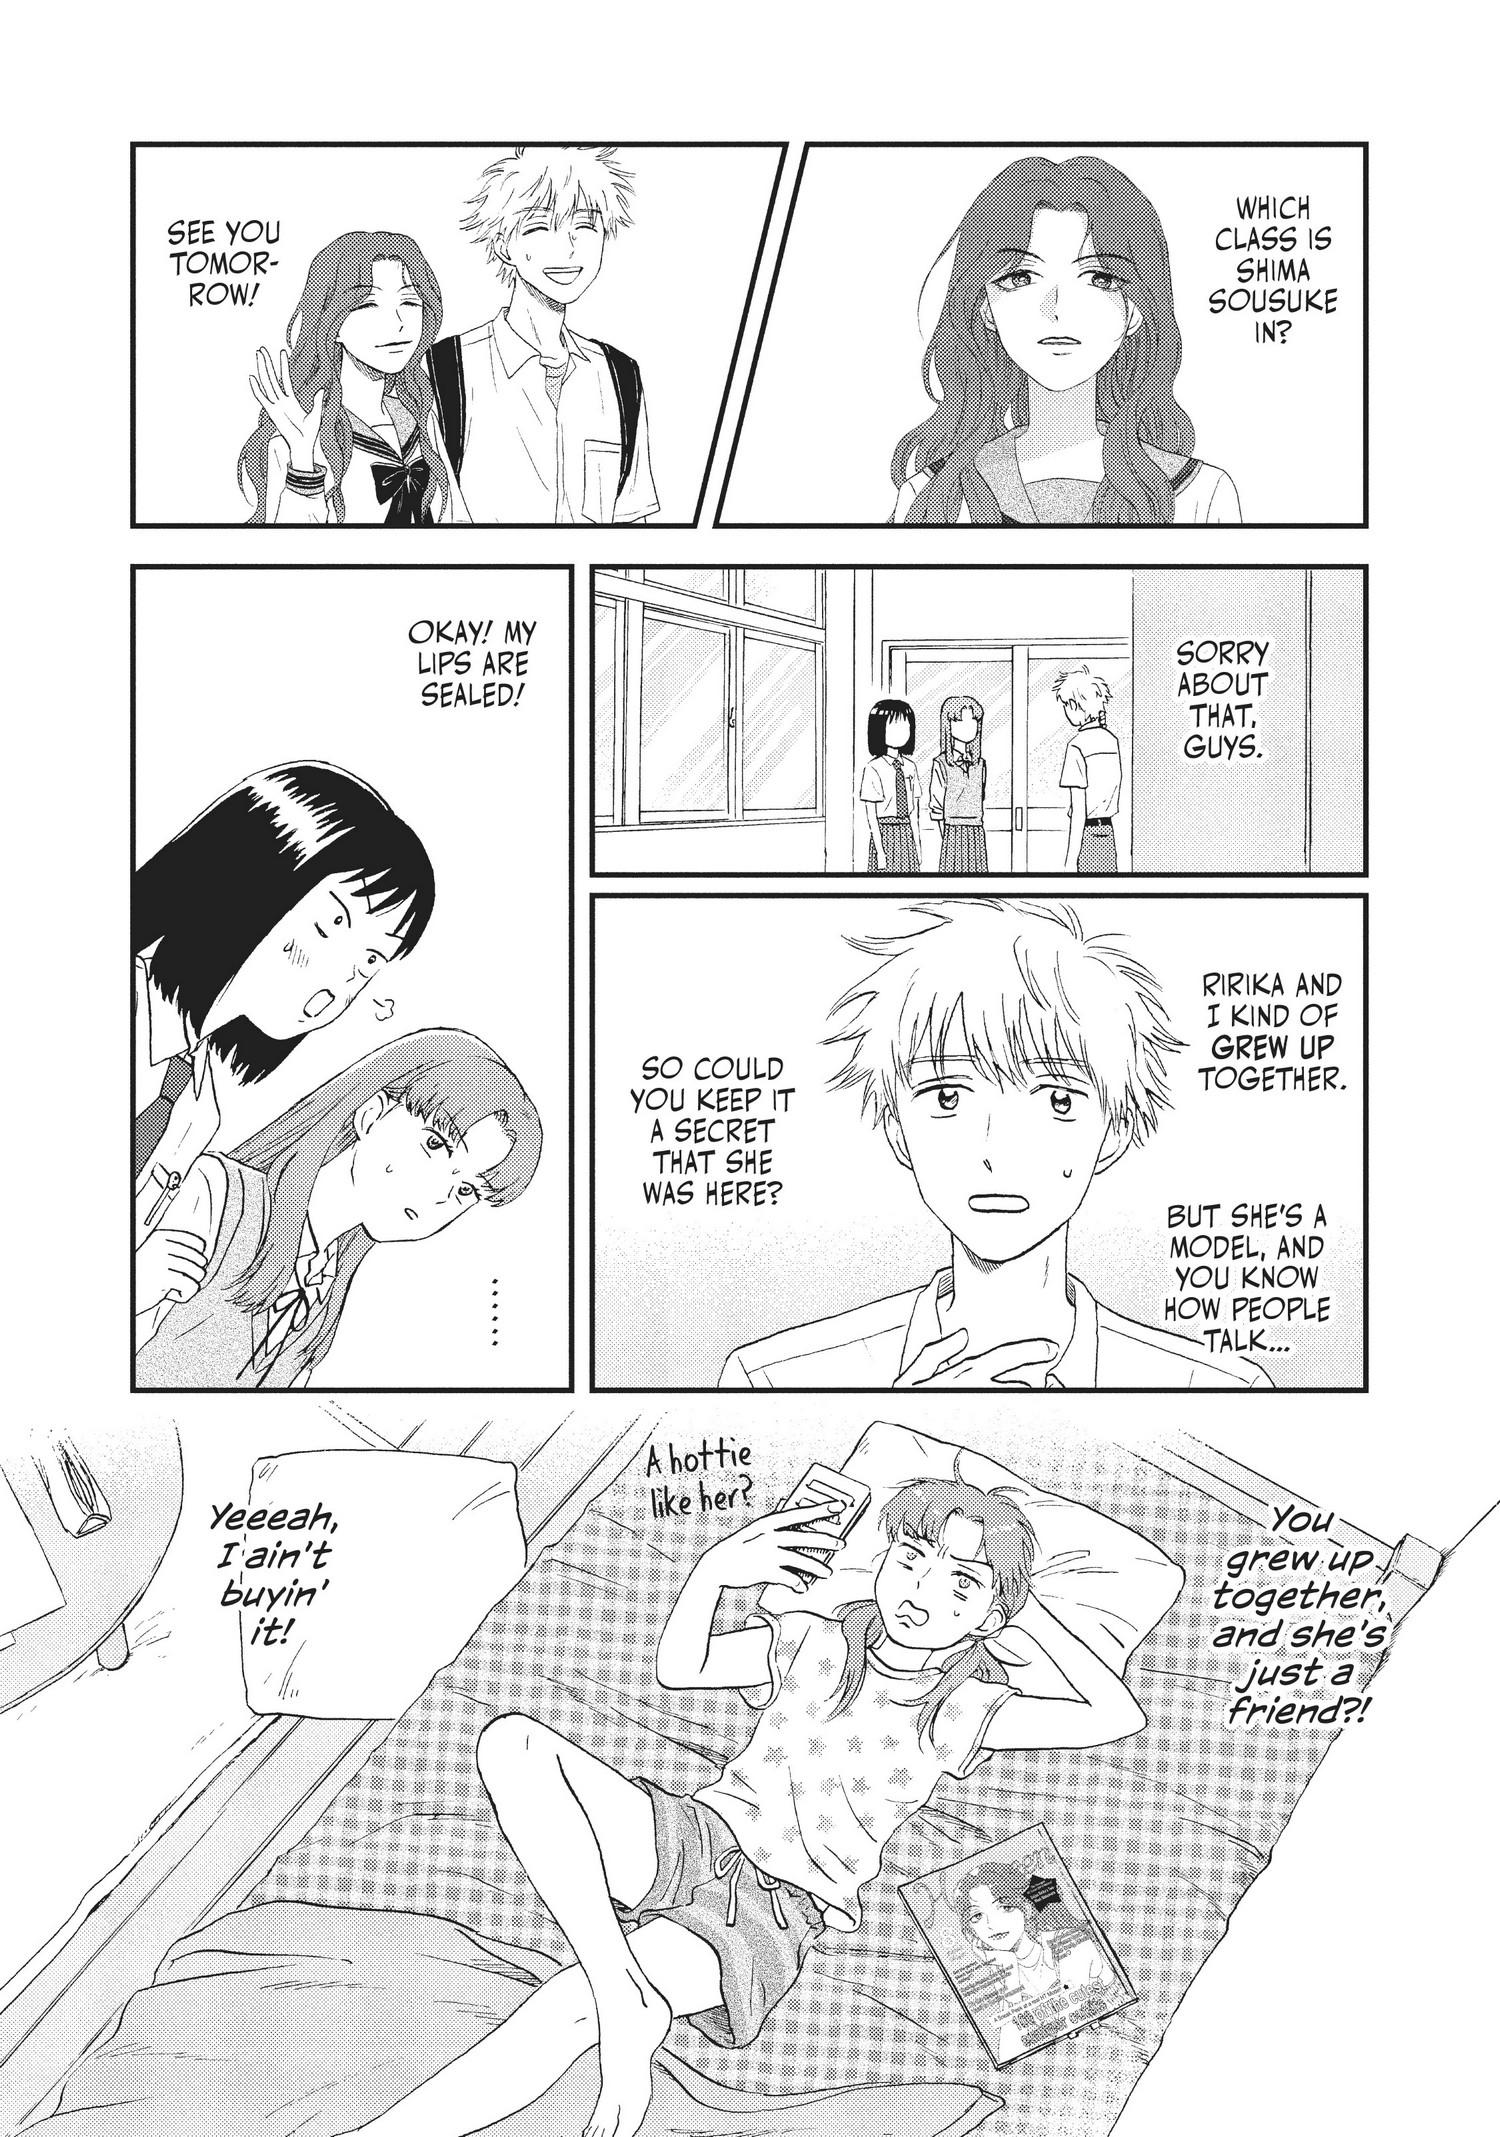 Skip to Loafer Vol.3 Ch.12-17 Page 56 - Mangago